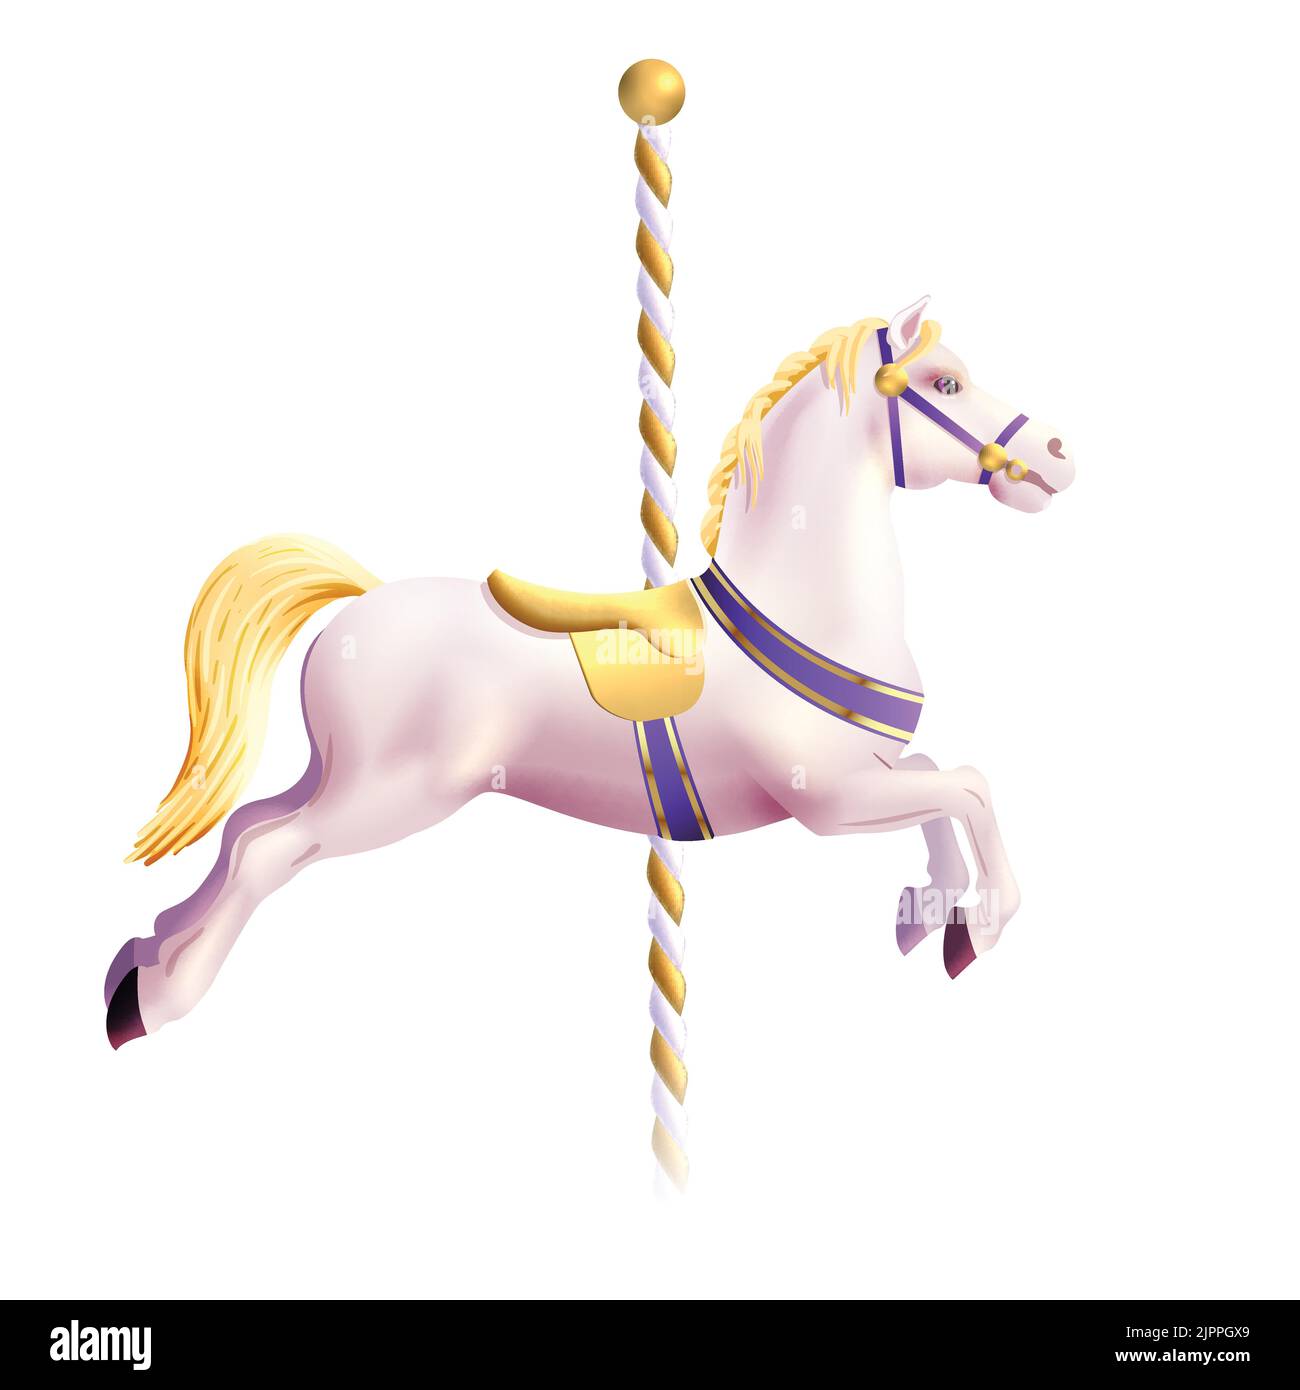 Realistic toy horse from traditional amusement park carousel vector illustration Stock Vector